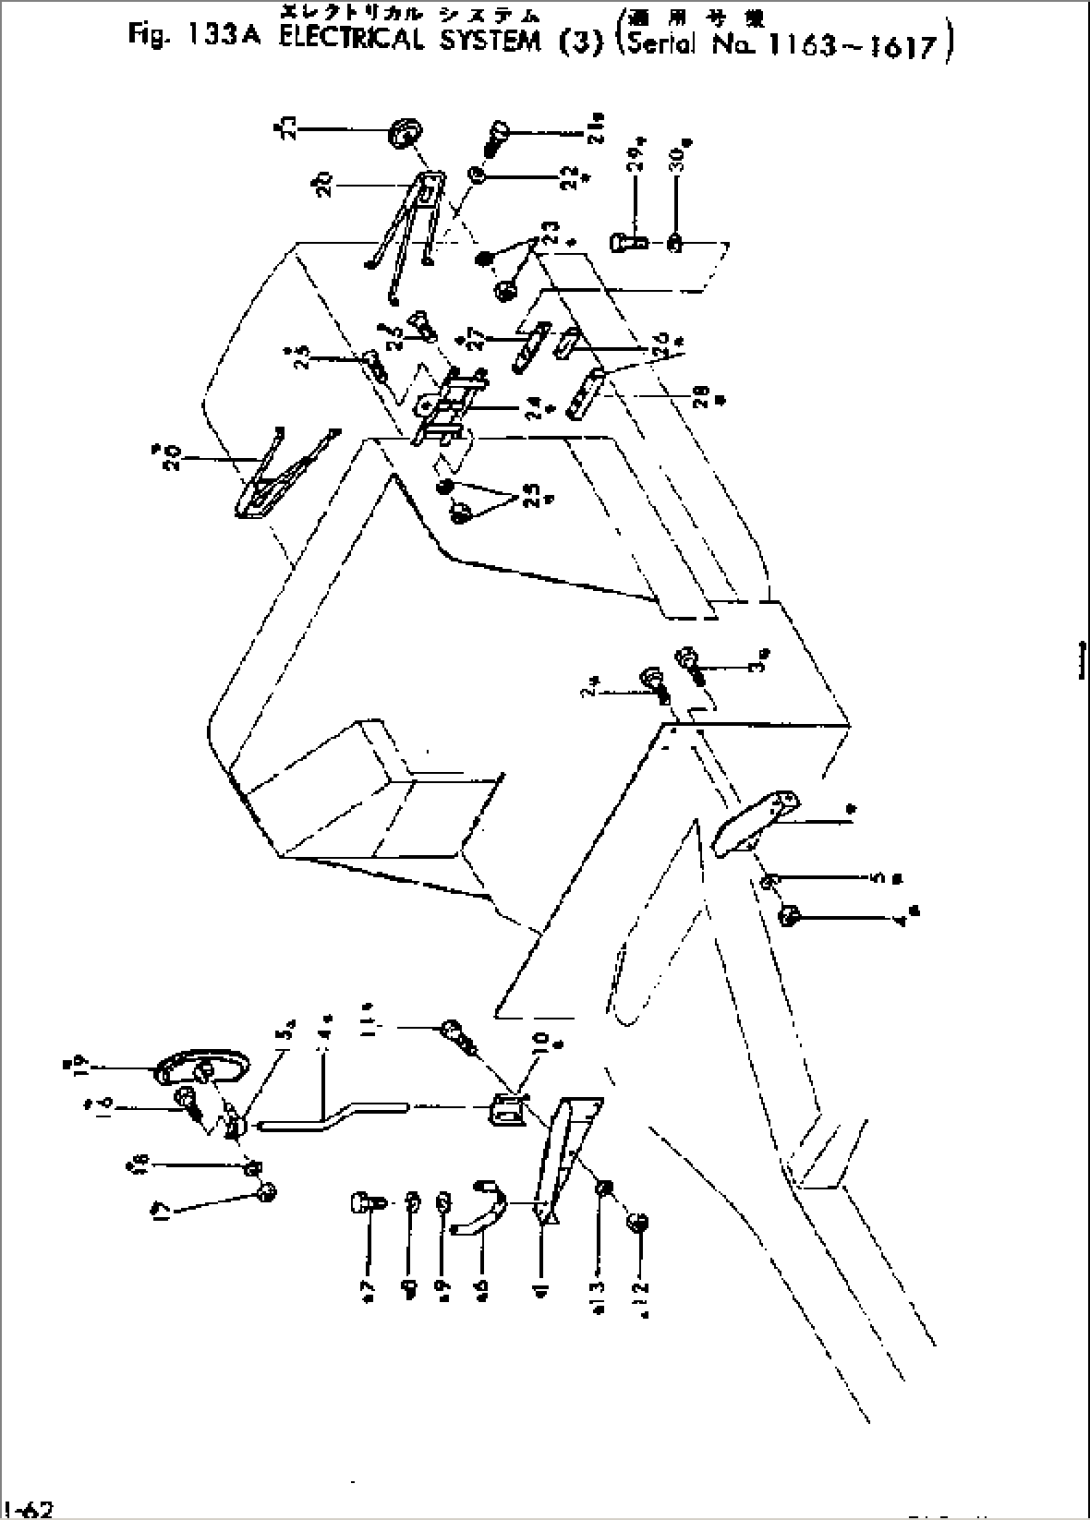 ELECTRICAL SYSTEM (3)(#1163-1617)